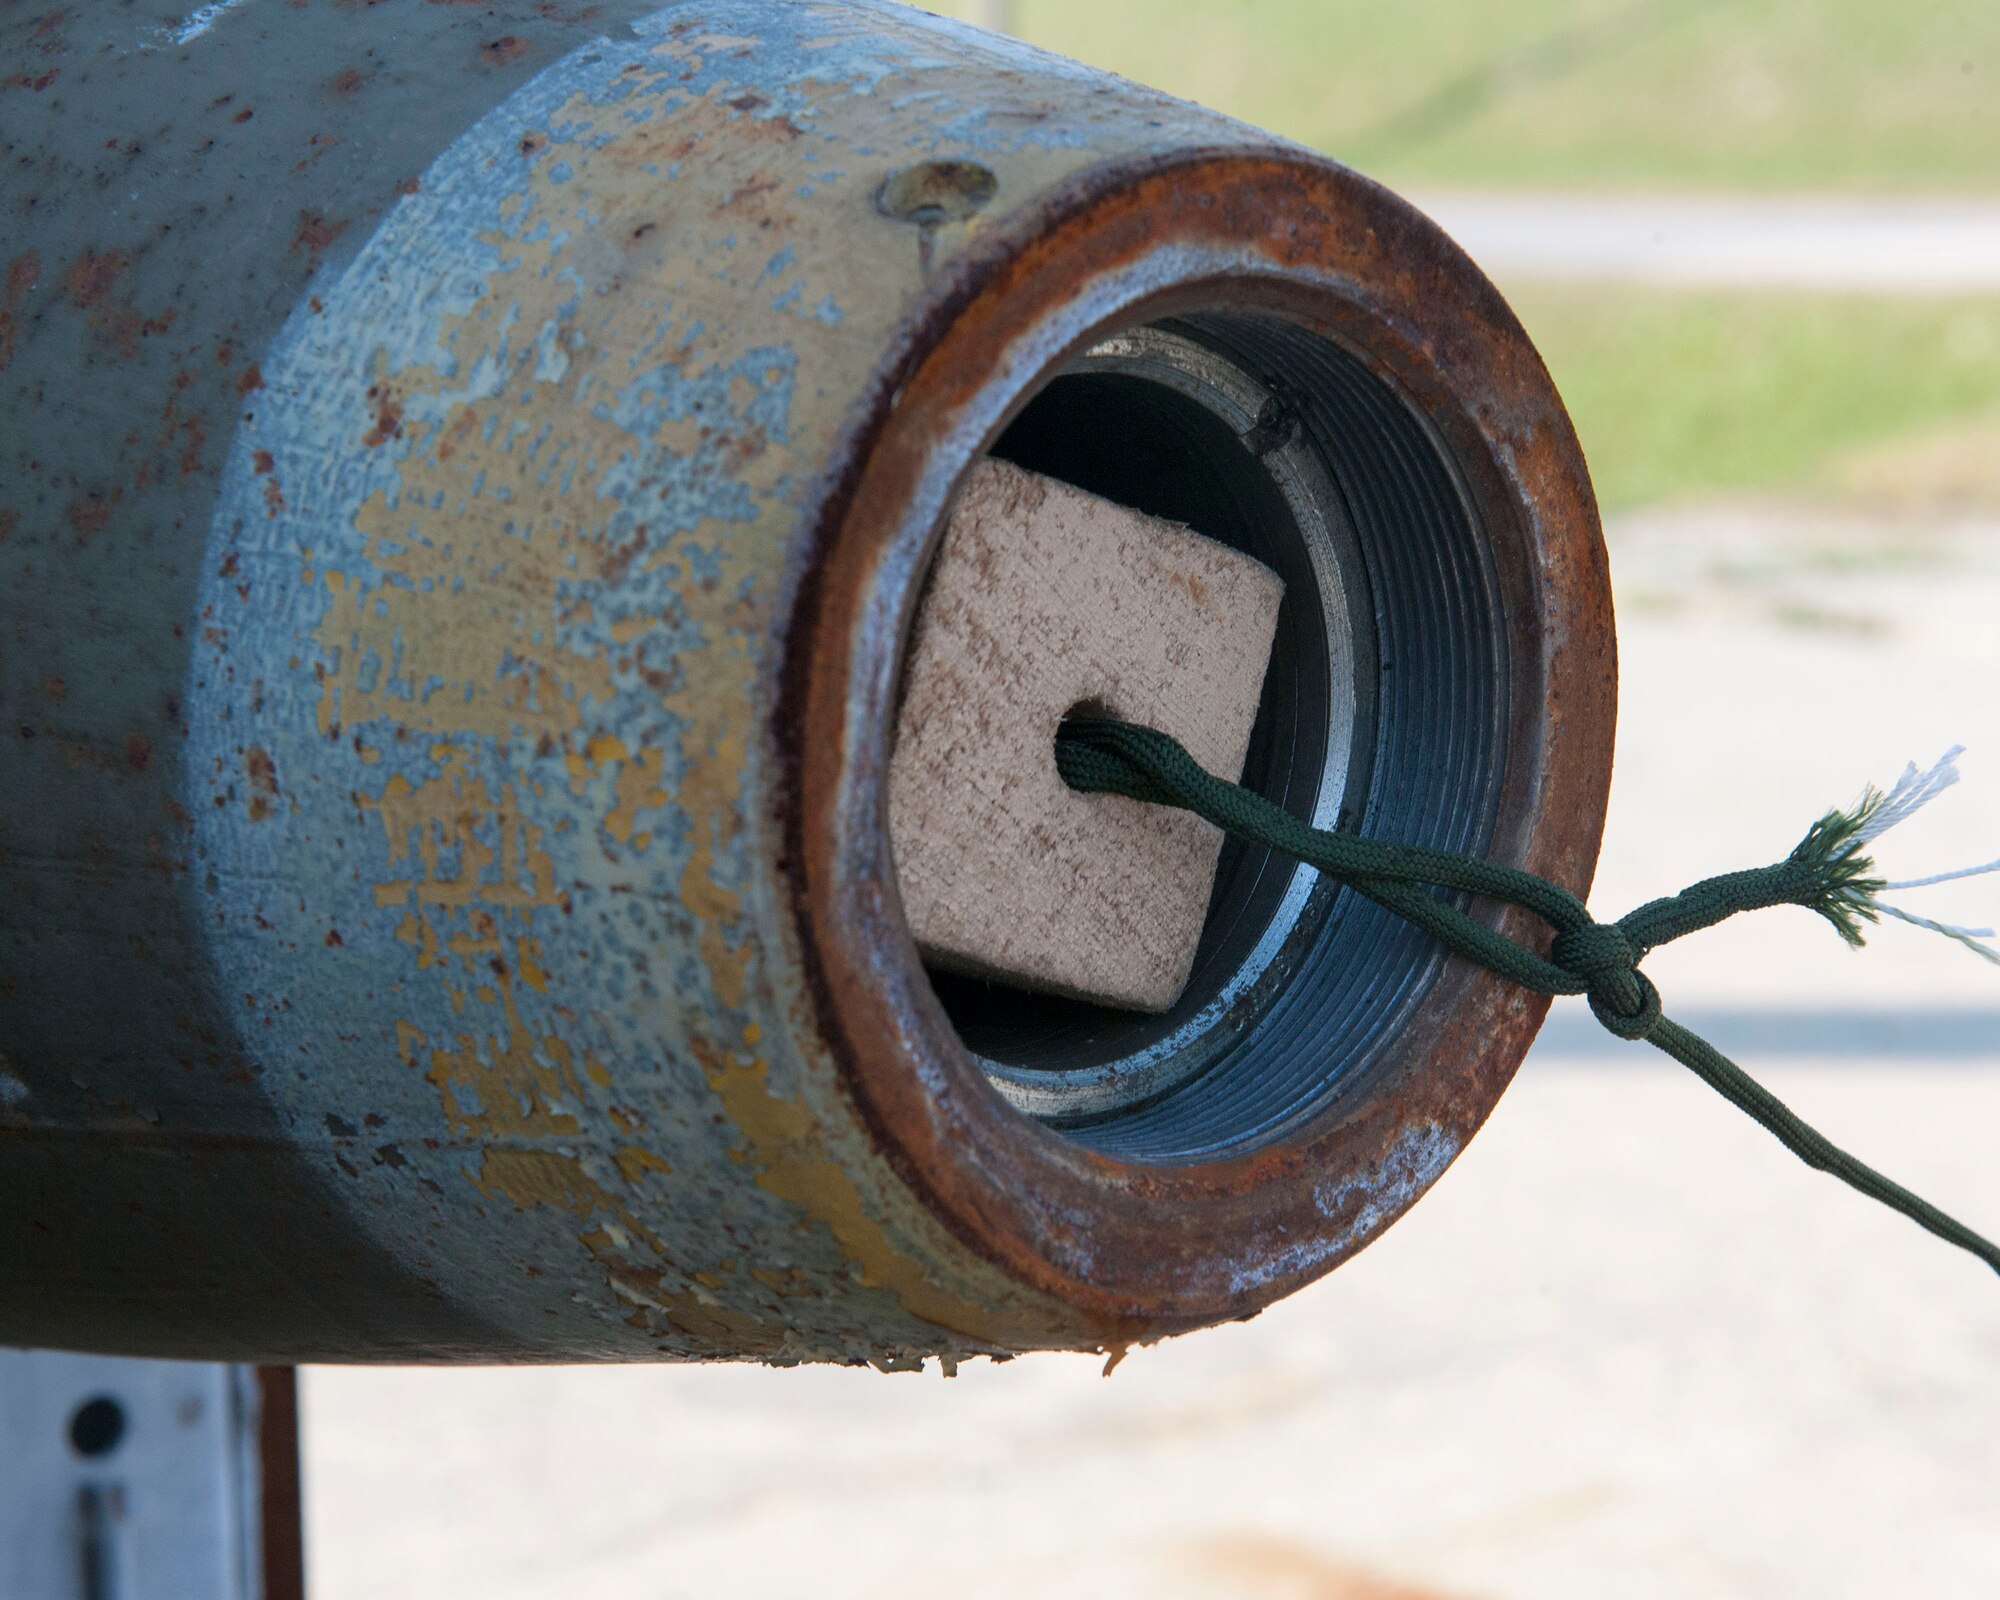 The above image shows a Mark-82 bomb attached to a detonation cord at the Kunsan Air Base Munitions Storage Area, following a successful emergency destruction of munitions simulation, Oct. 23, 2014. Airmen from the 8th Maintenance Squadron simulated destroying facilities through EDM – a measure used to prevent enemies from gaining access to critical munitions assets to use against the U.S. Armed Forces and its allies. (U.S. Air Force photo by Senior Airman Katrina Heikkinen/Released)